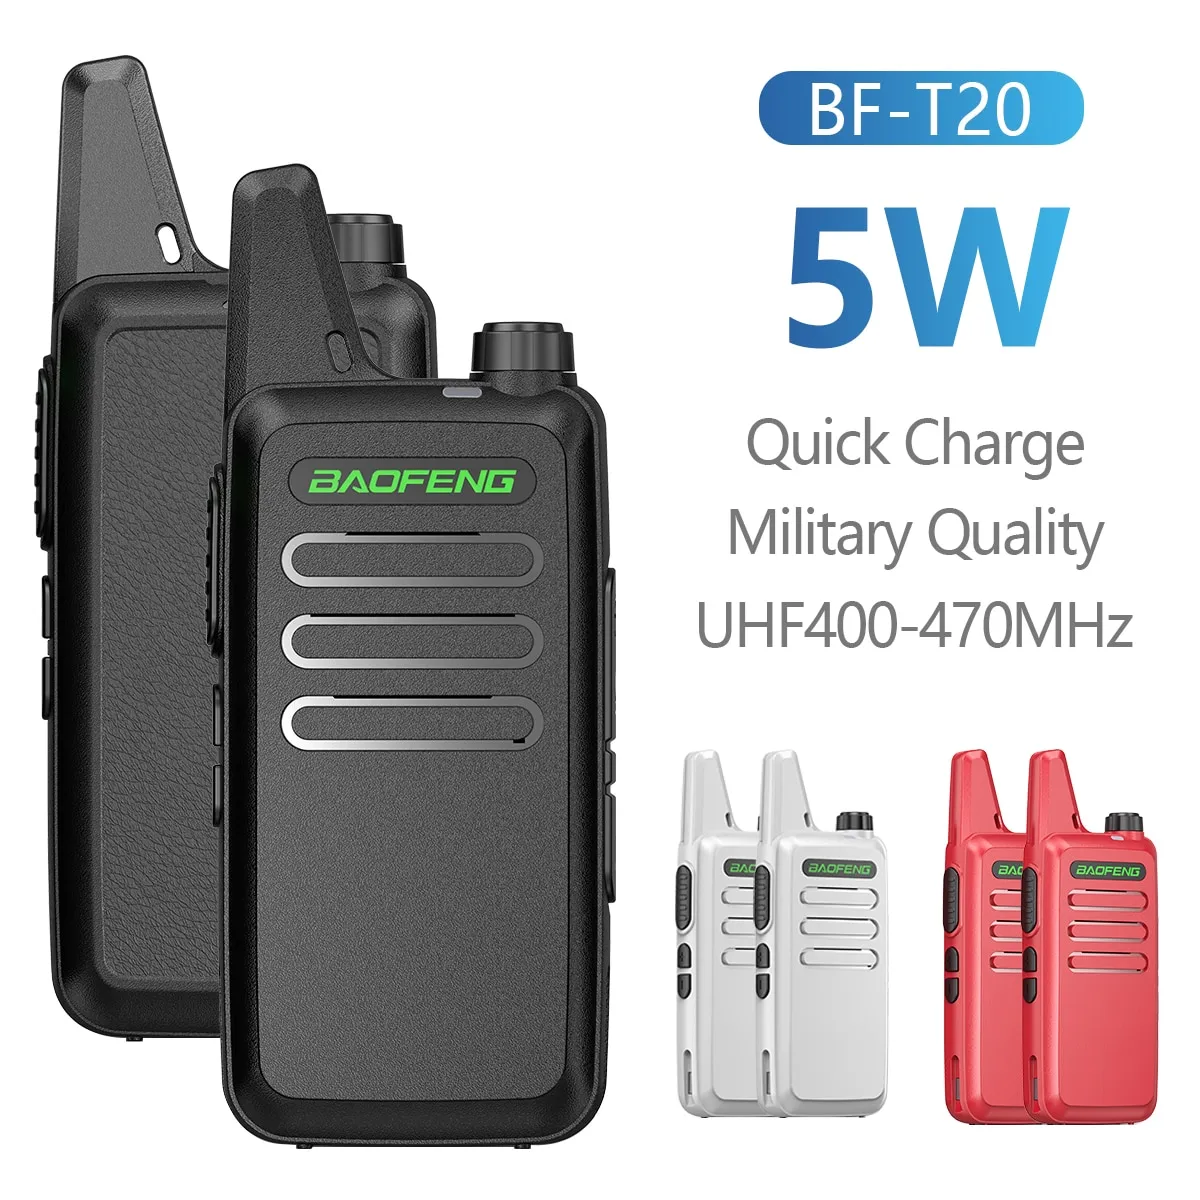 SET OF 10 】Baofeng BF-T20 5W 16 Channel UHF 400-470MHz Two-Way Black Walkie  Talkie Support USB Charging For BF-C9 BF-888S Radio Support COD First  choice for factory procurement Lazada PH